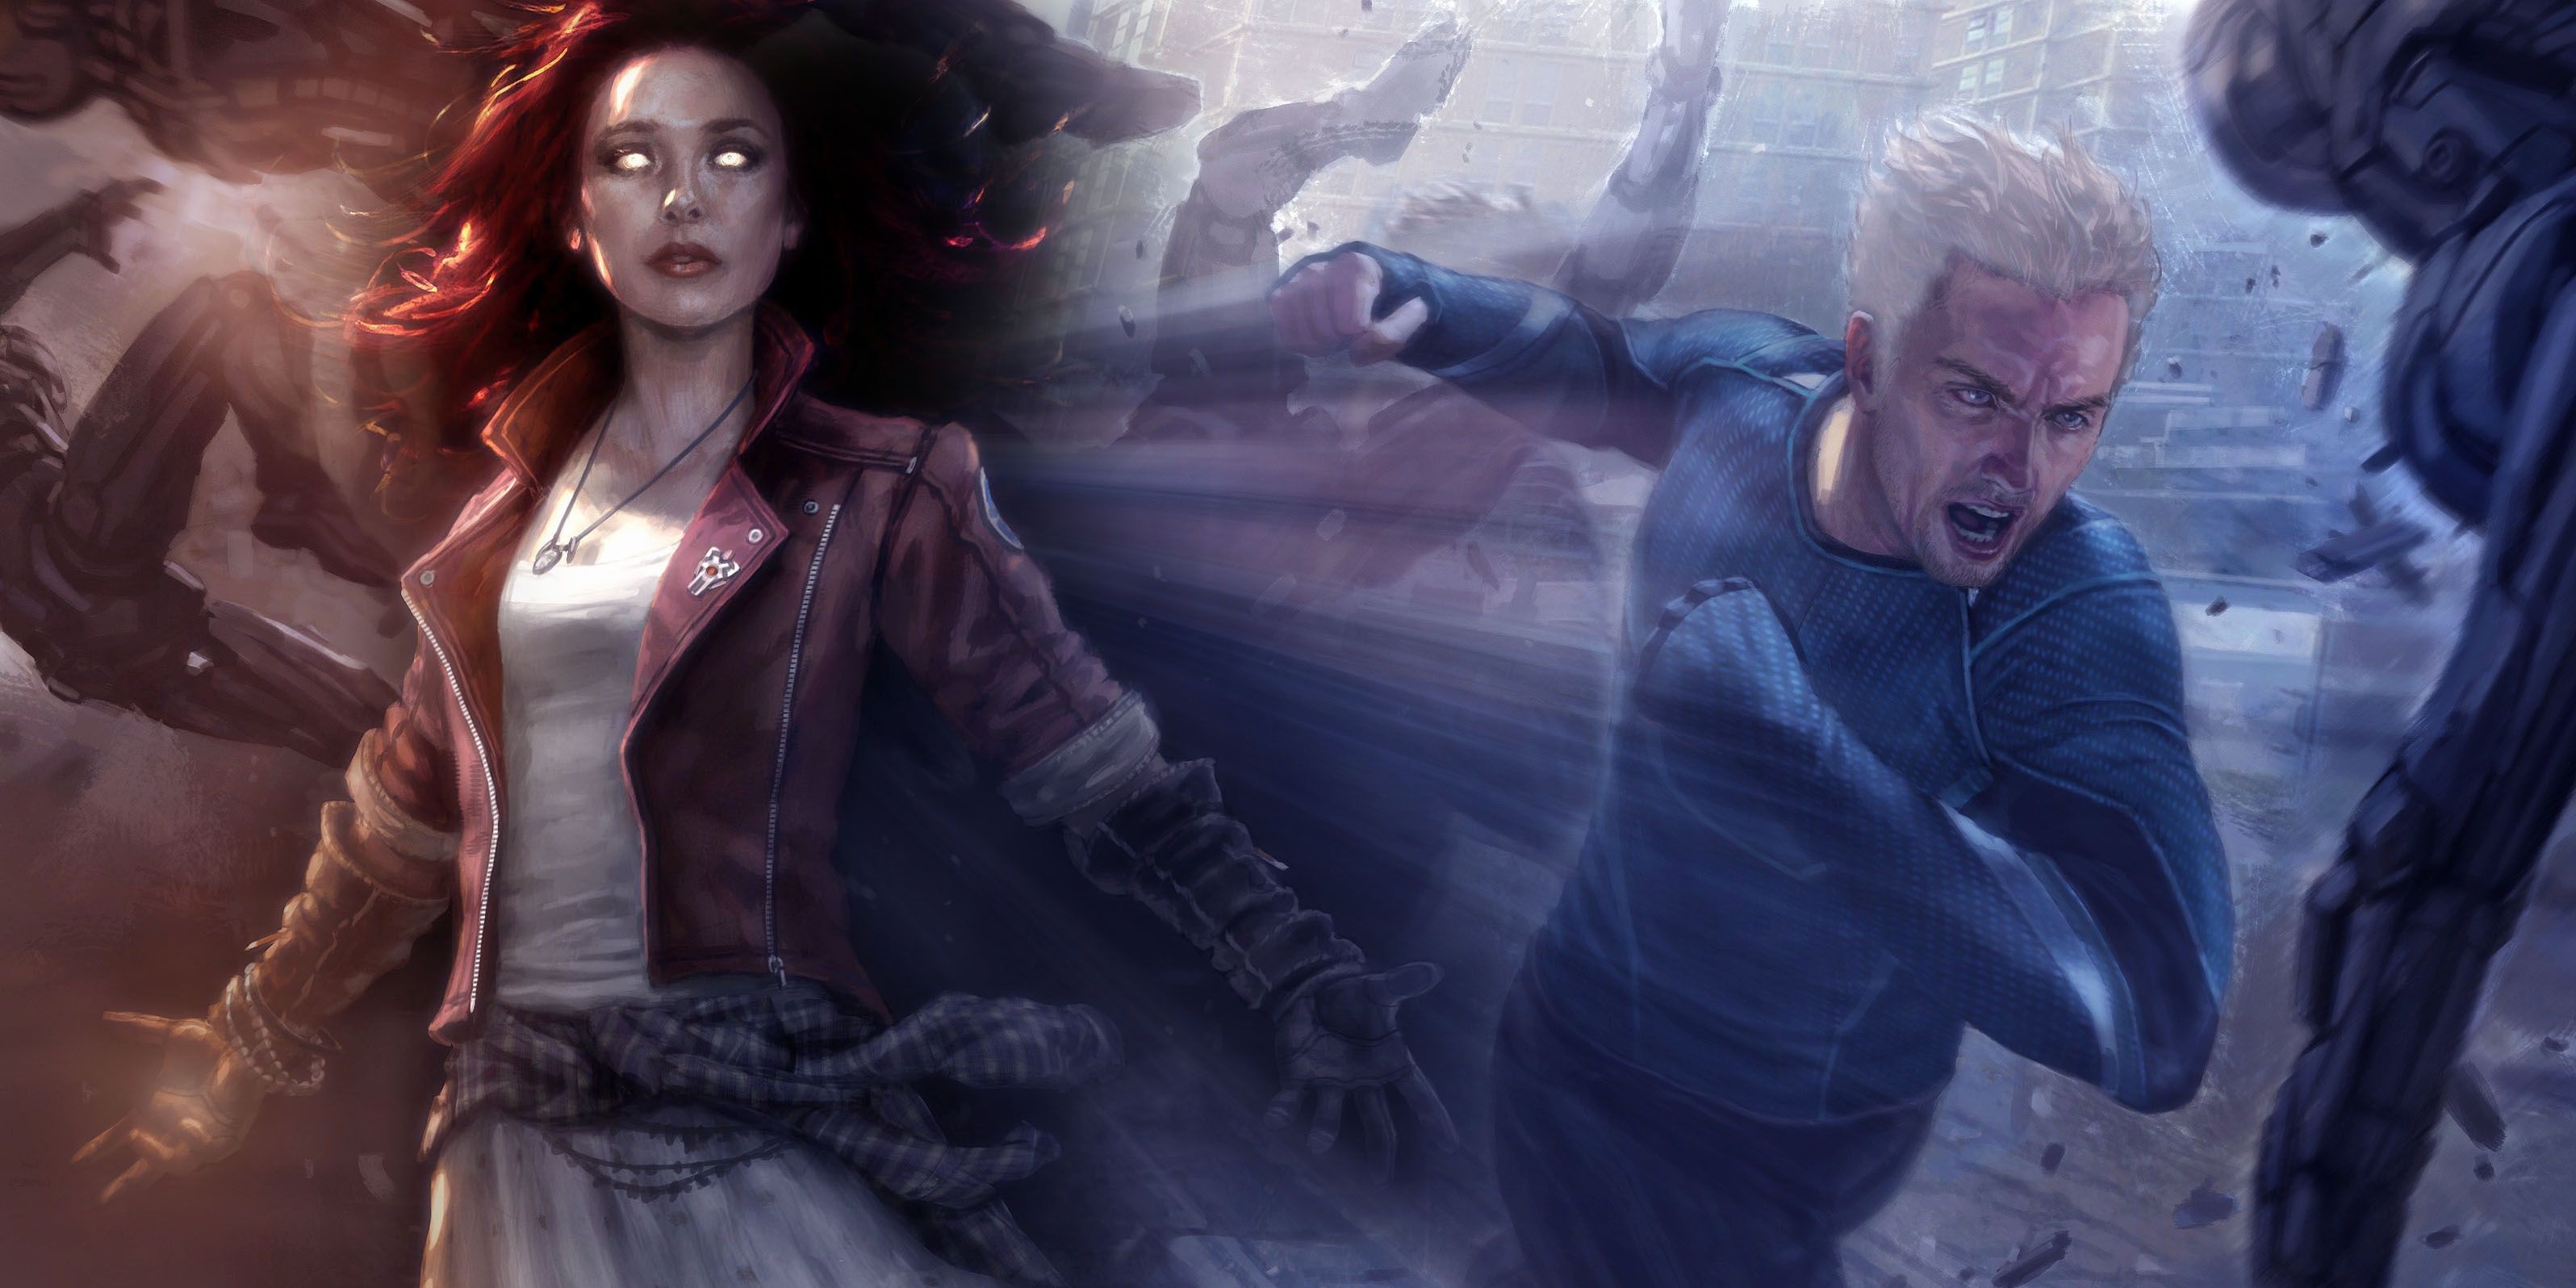 Maximoff Twins: Scarlet Witch and Quicksilver